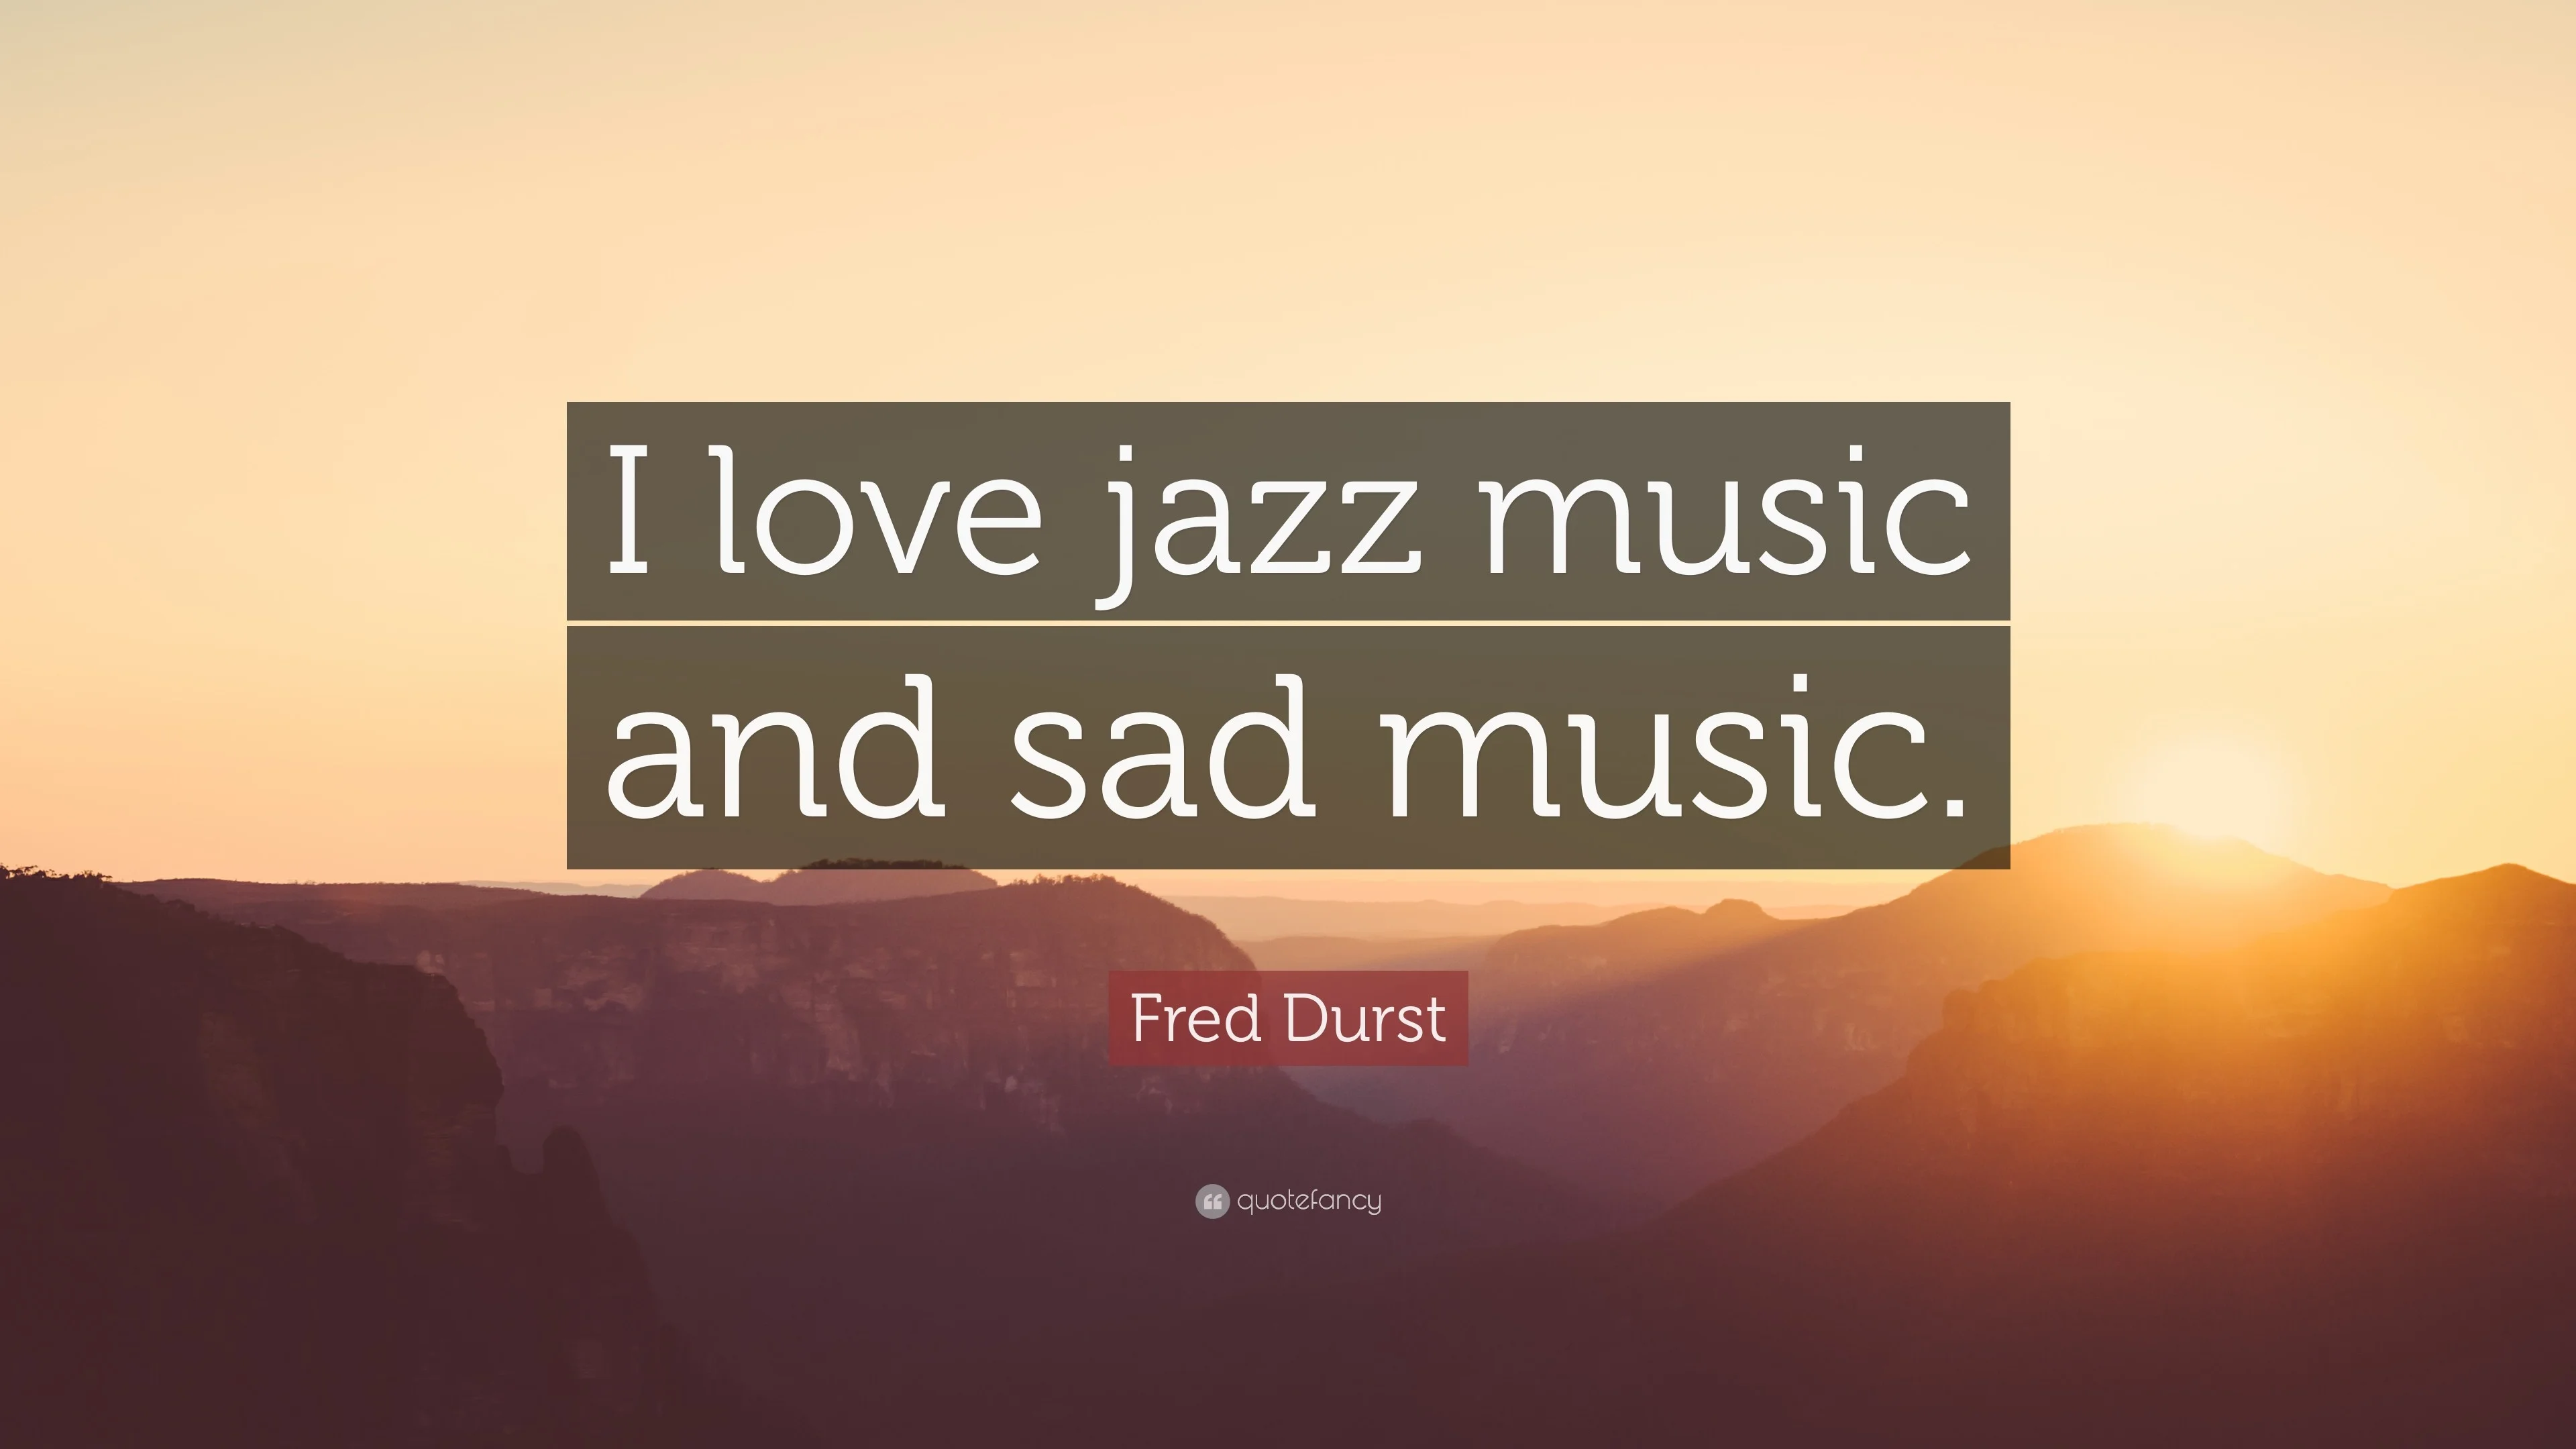 Fred Durst Quote I love jazz music and sad music.